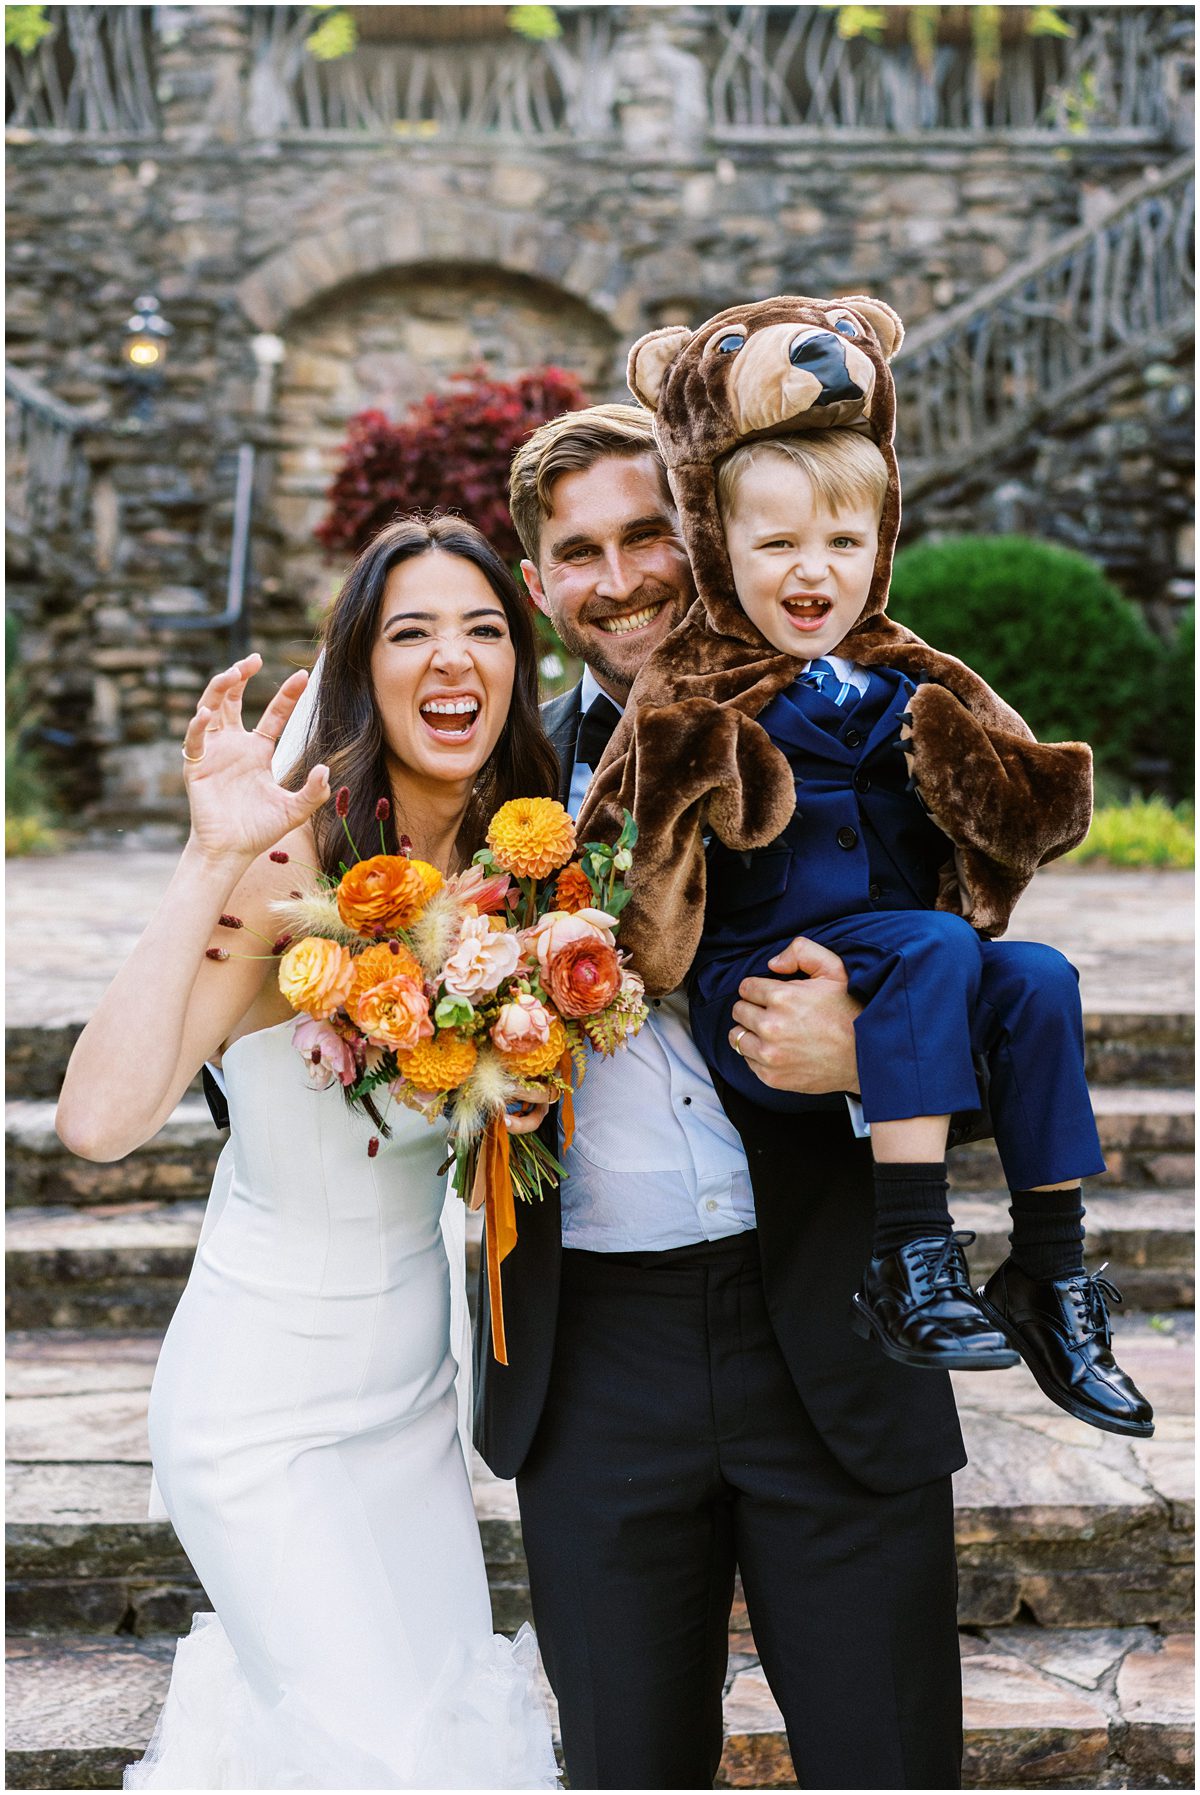 The ring bearer steals the show in a bear costume, fittingly playing the role of ring BEARer at this Highlands NC wedding